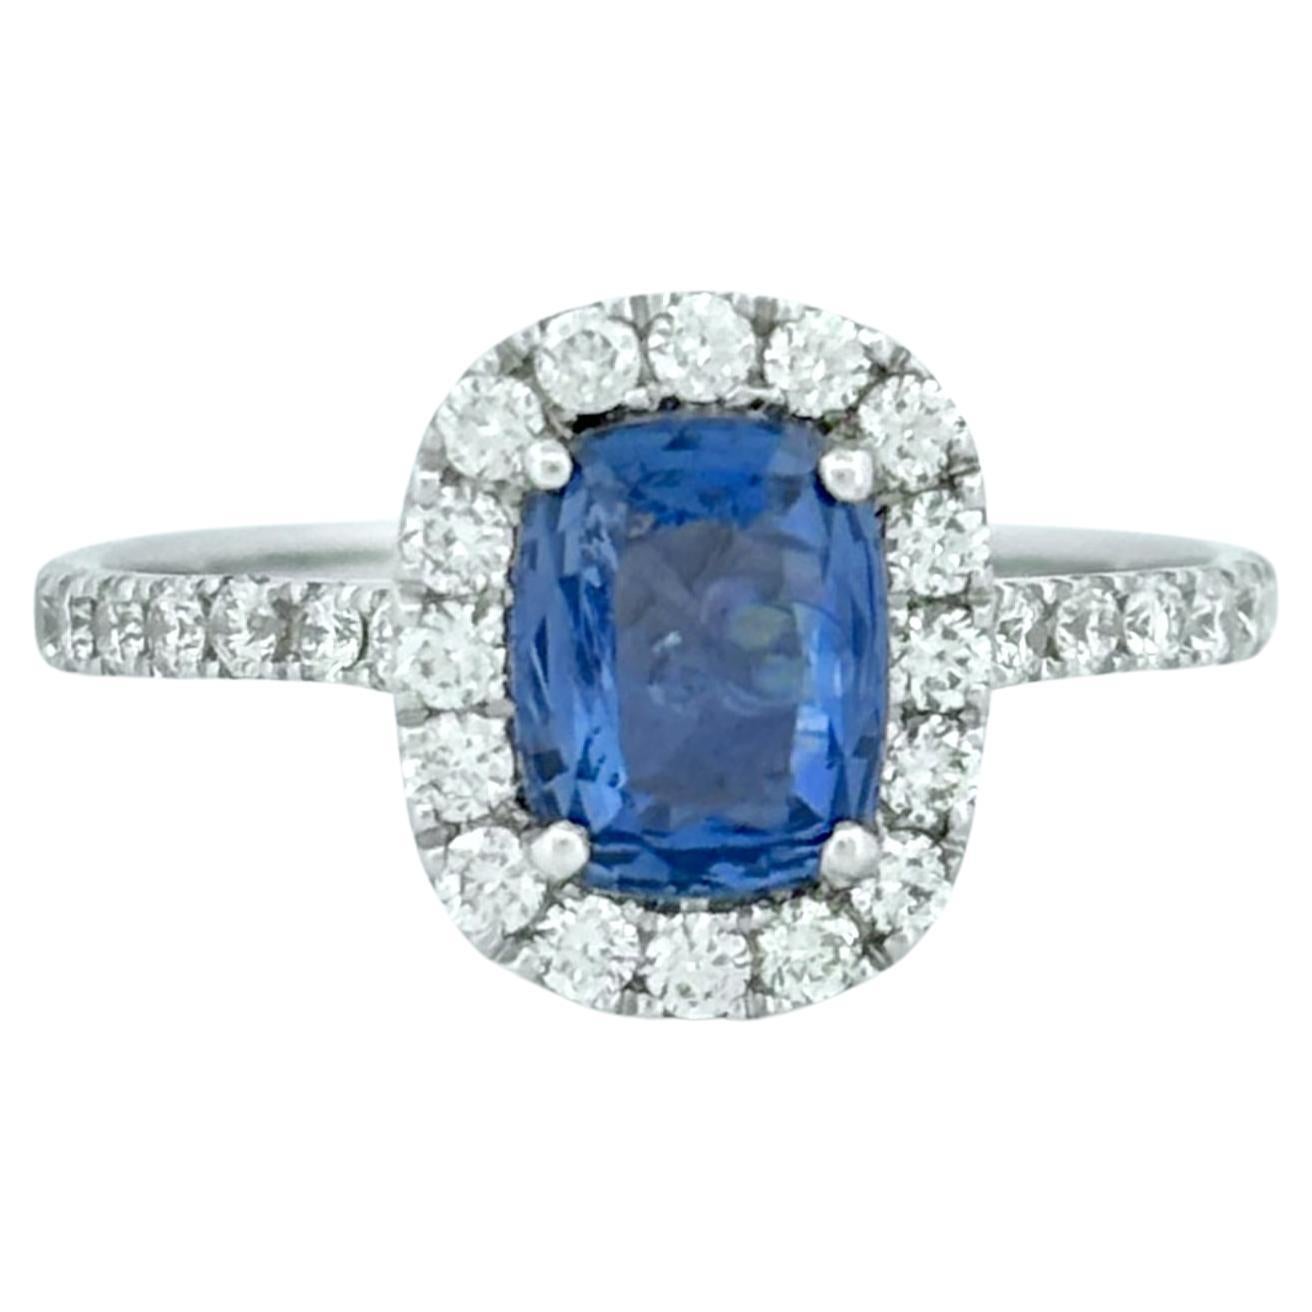 1.21 Carat Ceylon Blue Sapphire Ring with Halo Diamonds in 14K White Gold For Sale